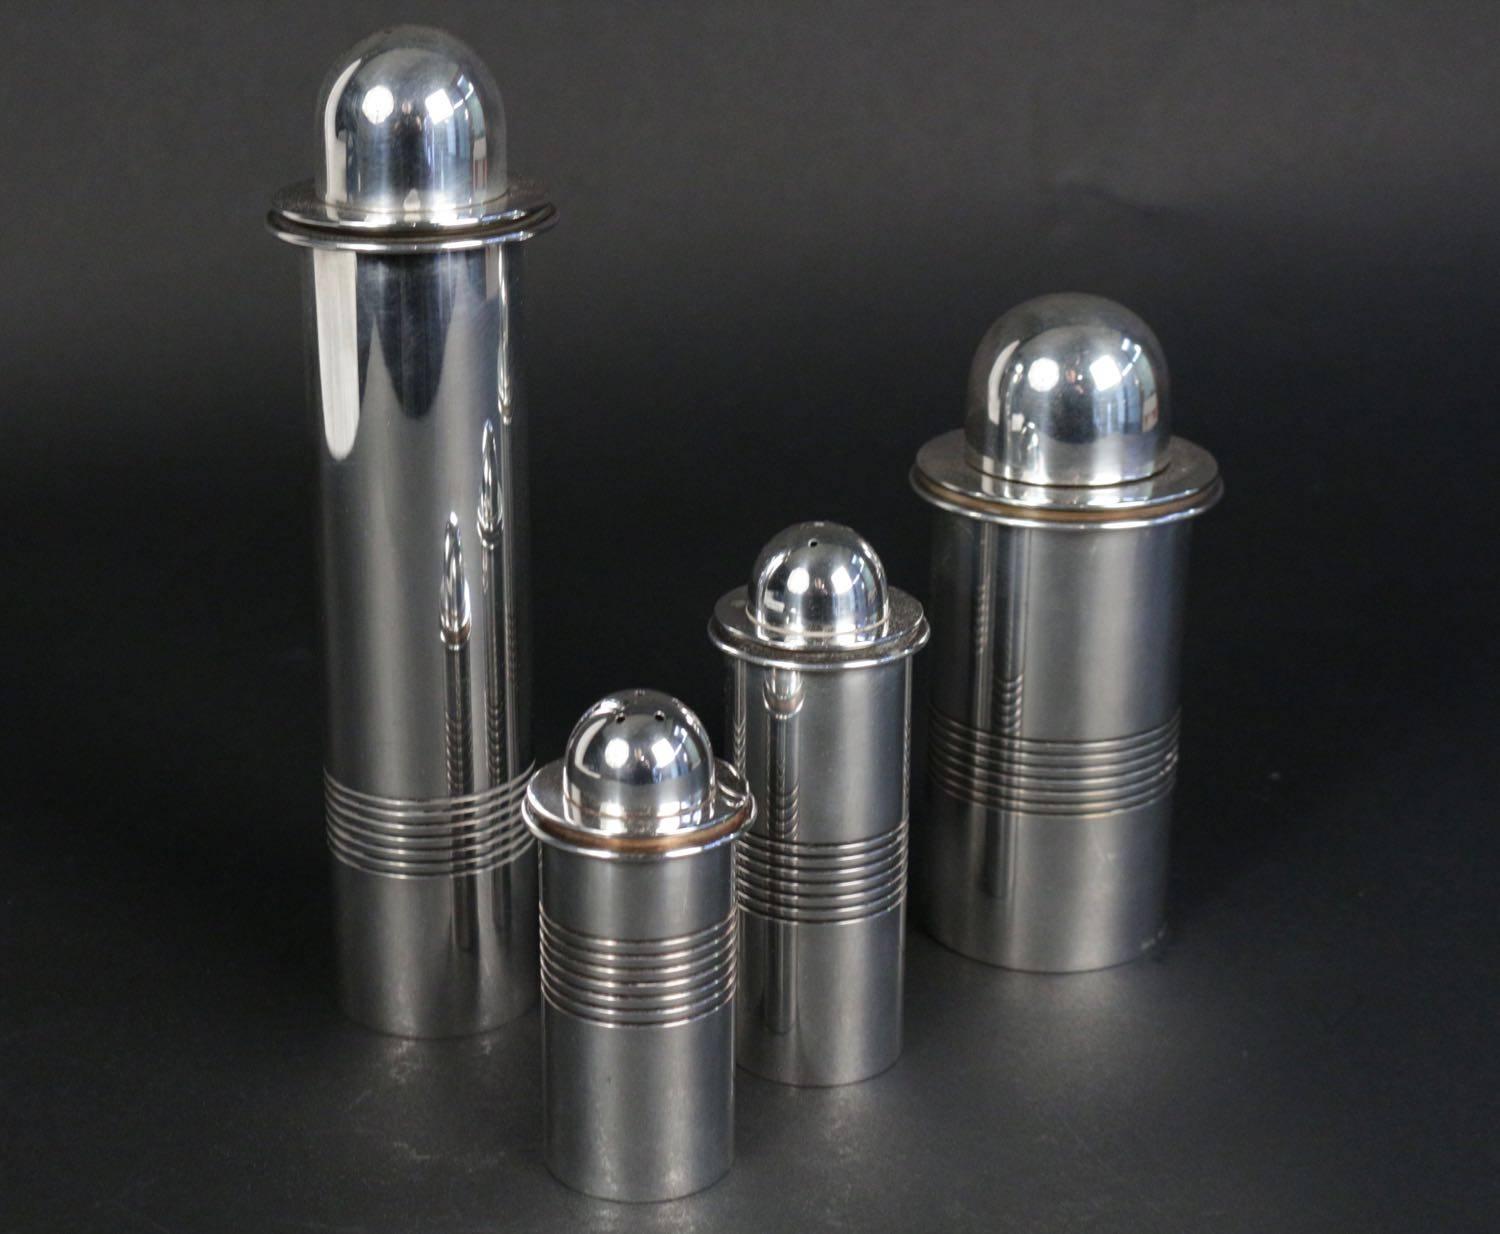 Rare Set of silver plated table ware by Lino Sabattini, 1960s.
It includes:
One pepper mill.
Height:23 cm Diam: 7 cm.
One pepper Shaker.
Height: 12 cm Diam : 5 cm.
One salt Shaker.
Height: 10 cm Diam : 5 cm.
One Paremsan grater (including